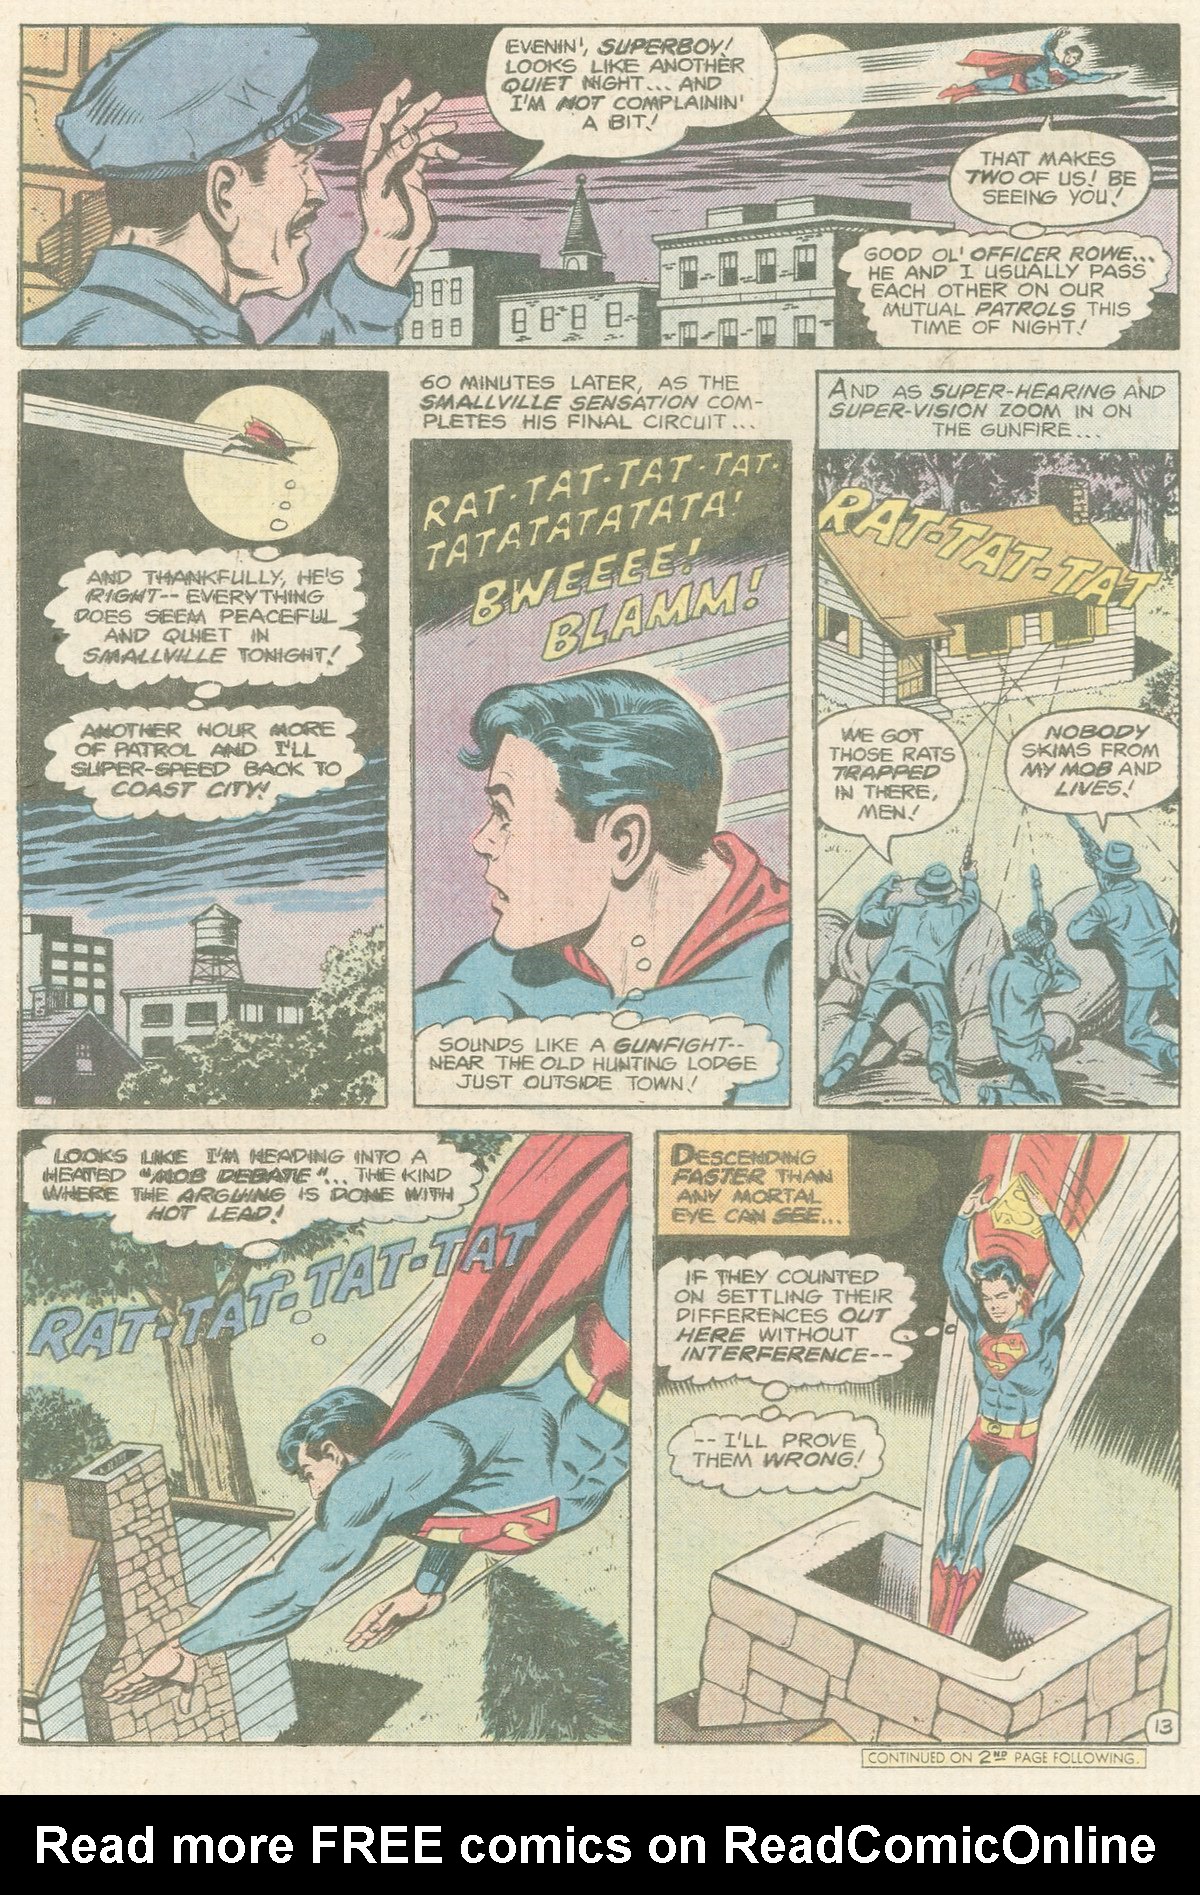 The New Adventures of Superboy 13 Page 13